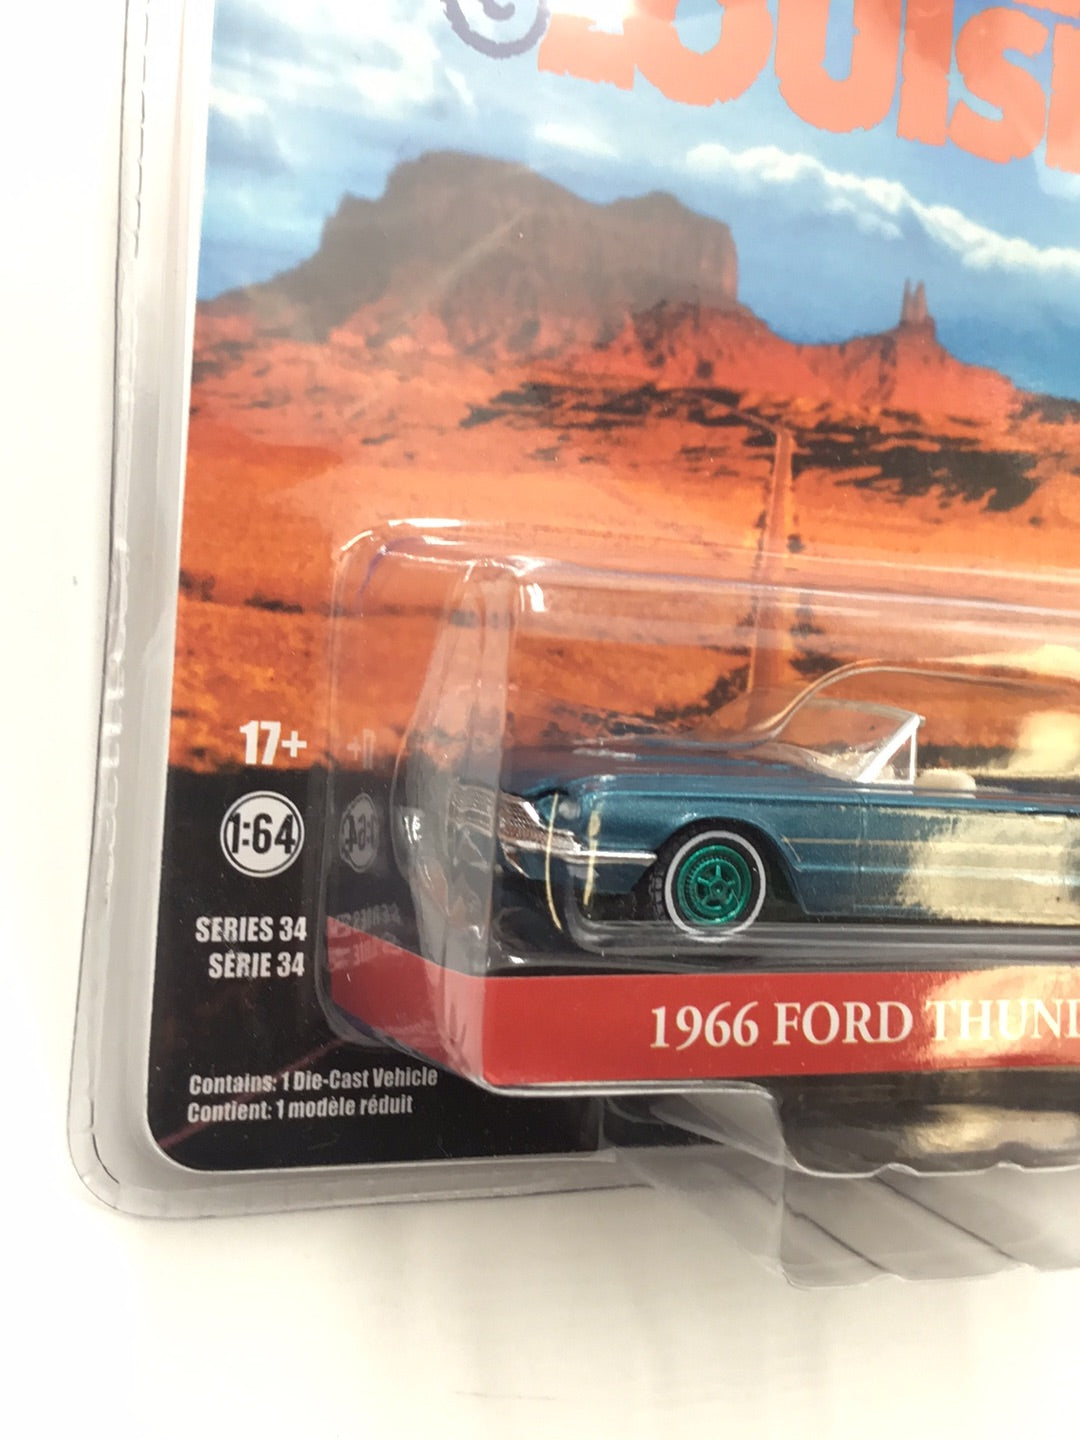 Greenlight Hollywood Thelma and Louise 1966 Ford Thunderbird green machine CHASE